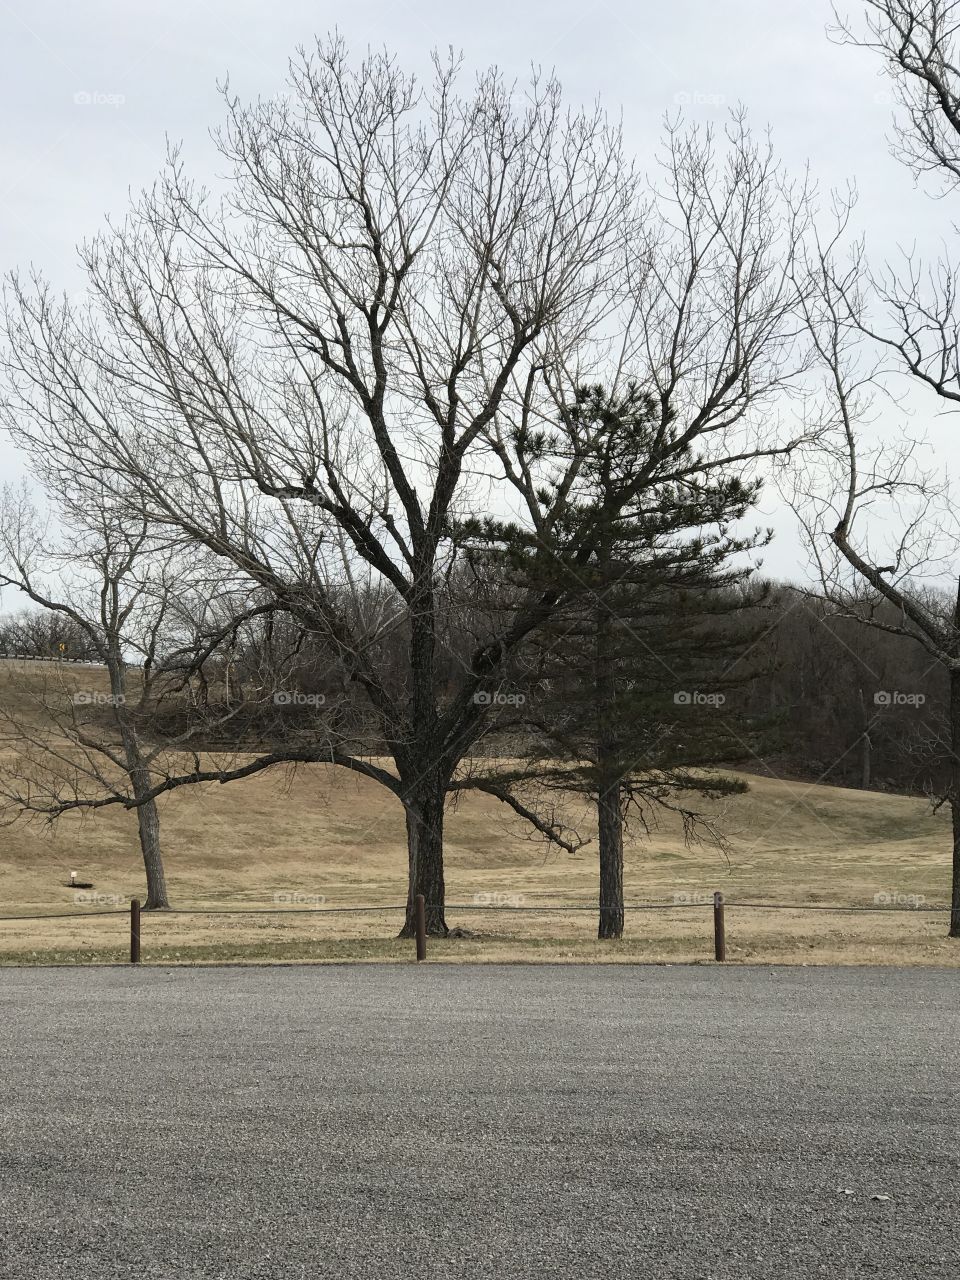 Oologah Lake Oklahoma area in winter/ January trees in park area, one every green and hillside near water release area.